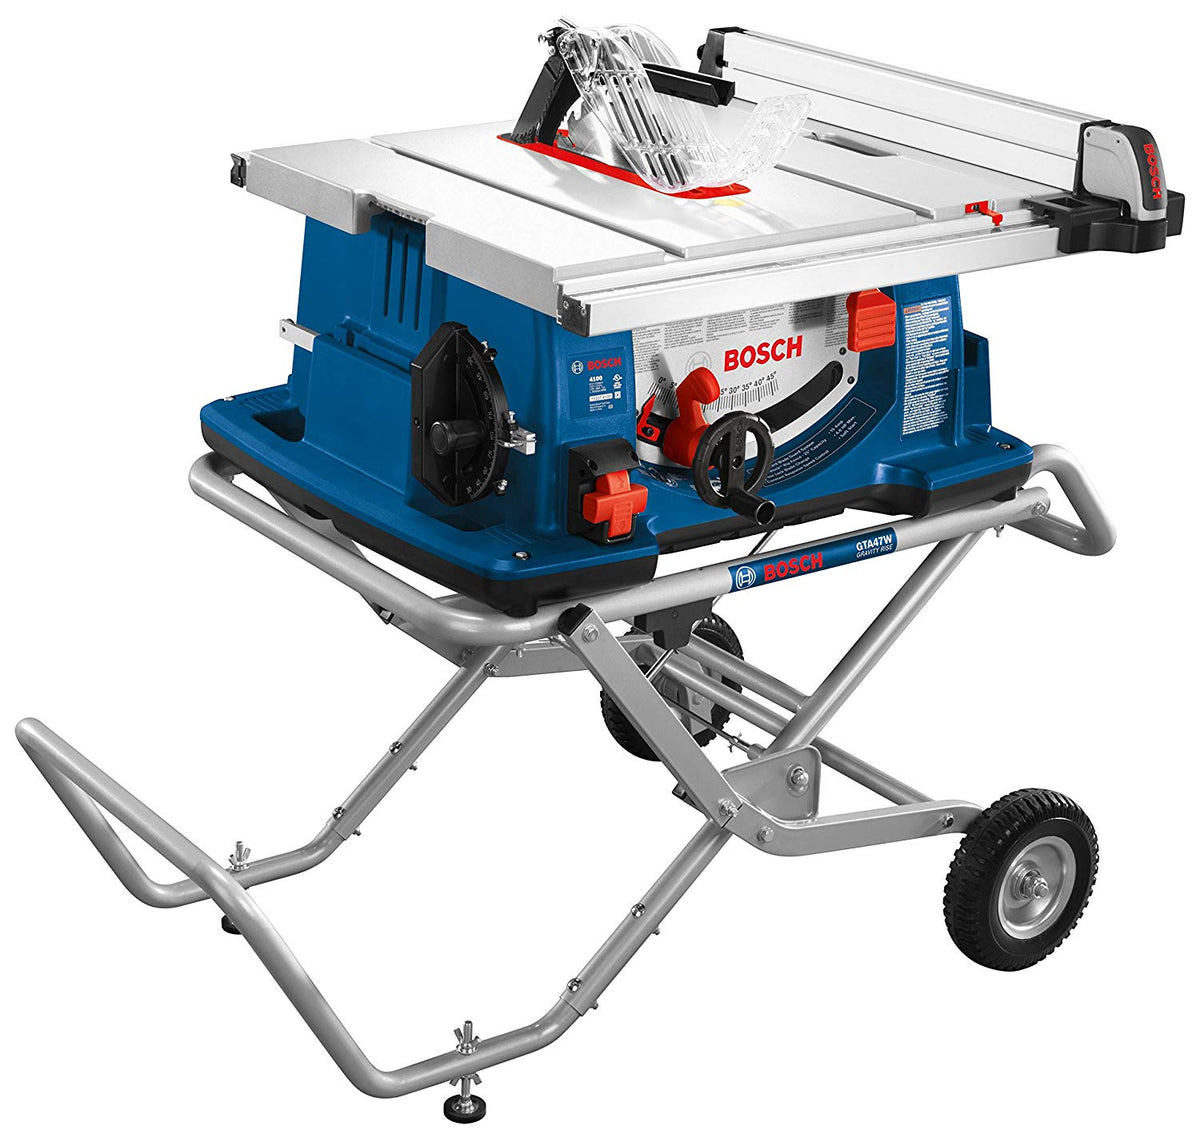 Bosch 4100-10 Worksite Table Saw with Gravity-Rise Wheeled Stand, 10"